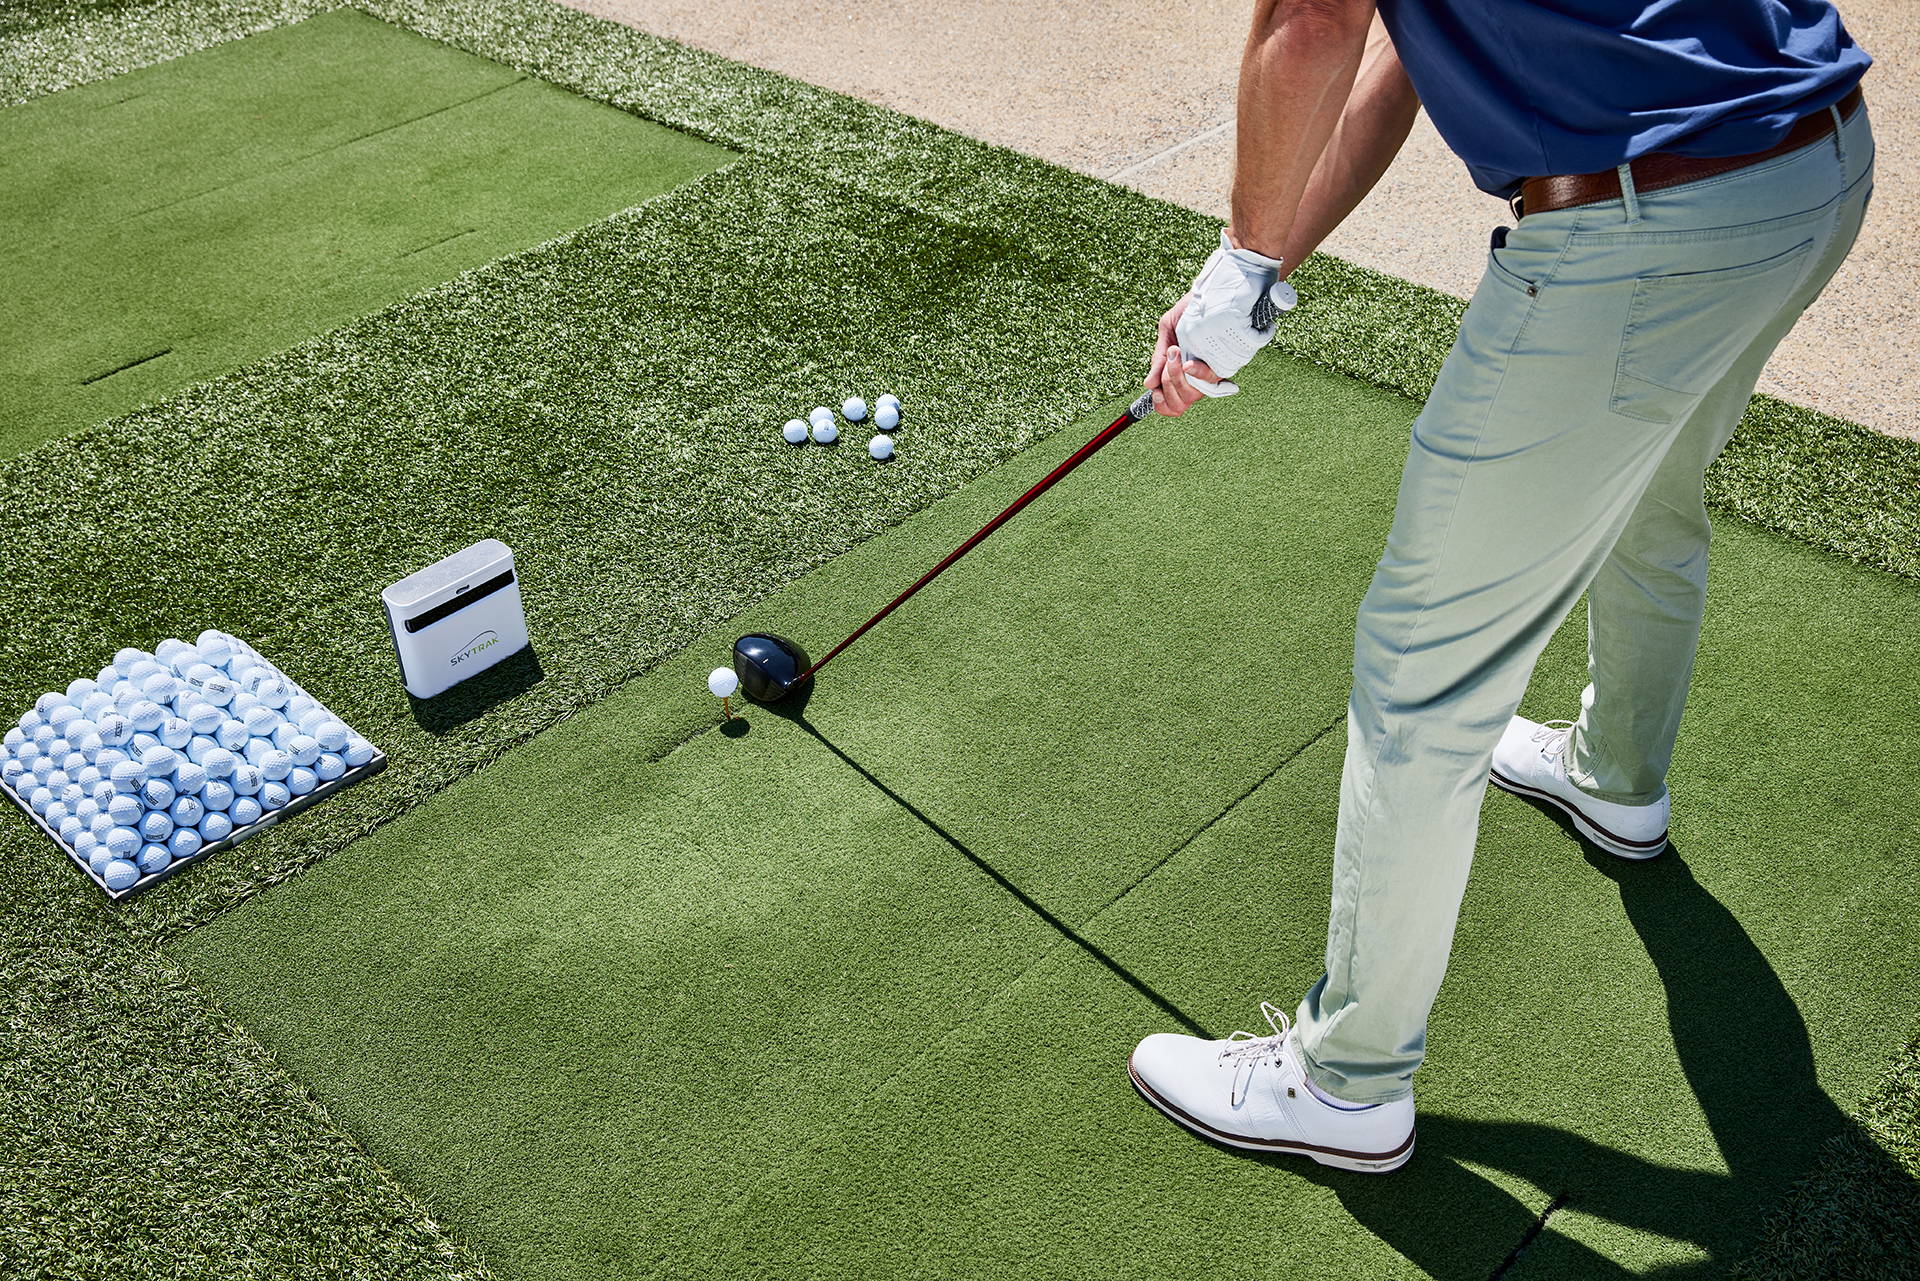 The lower half of a golfer shown while getting ready to swing at a golf range with a SkyTrak+ and a large stack of balls